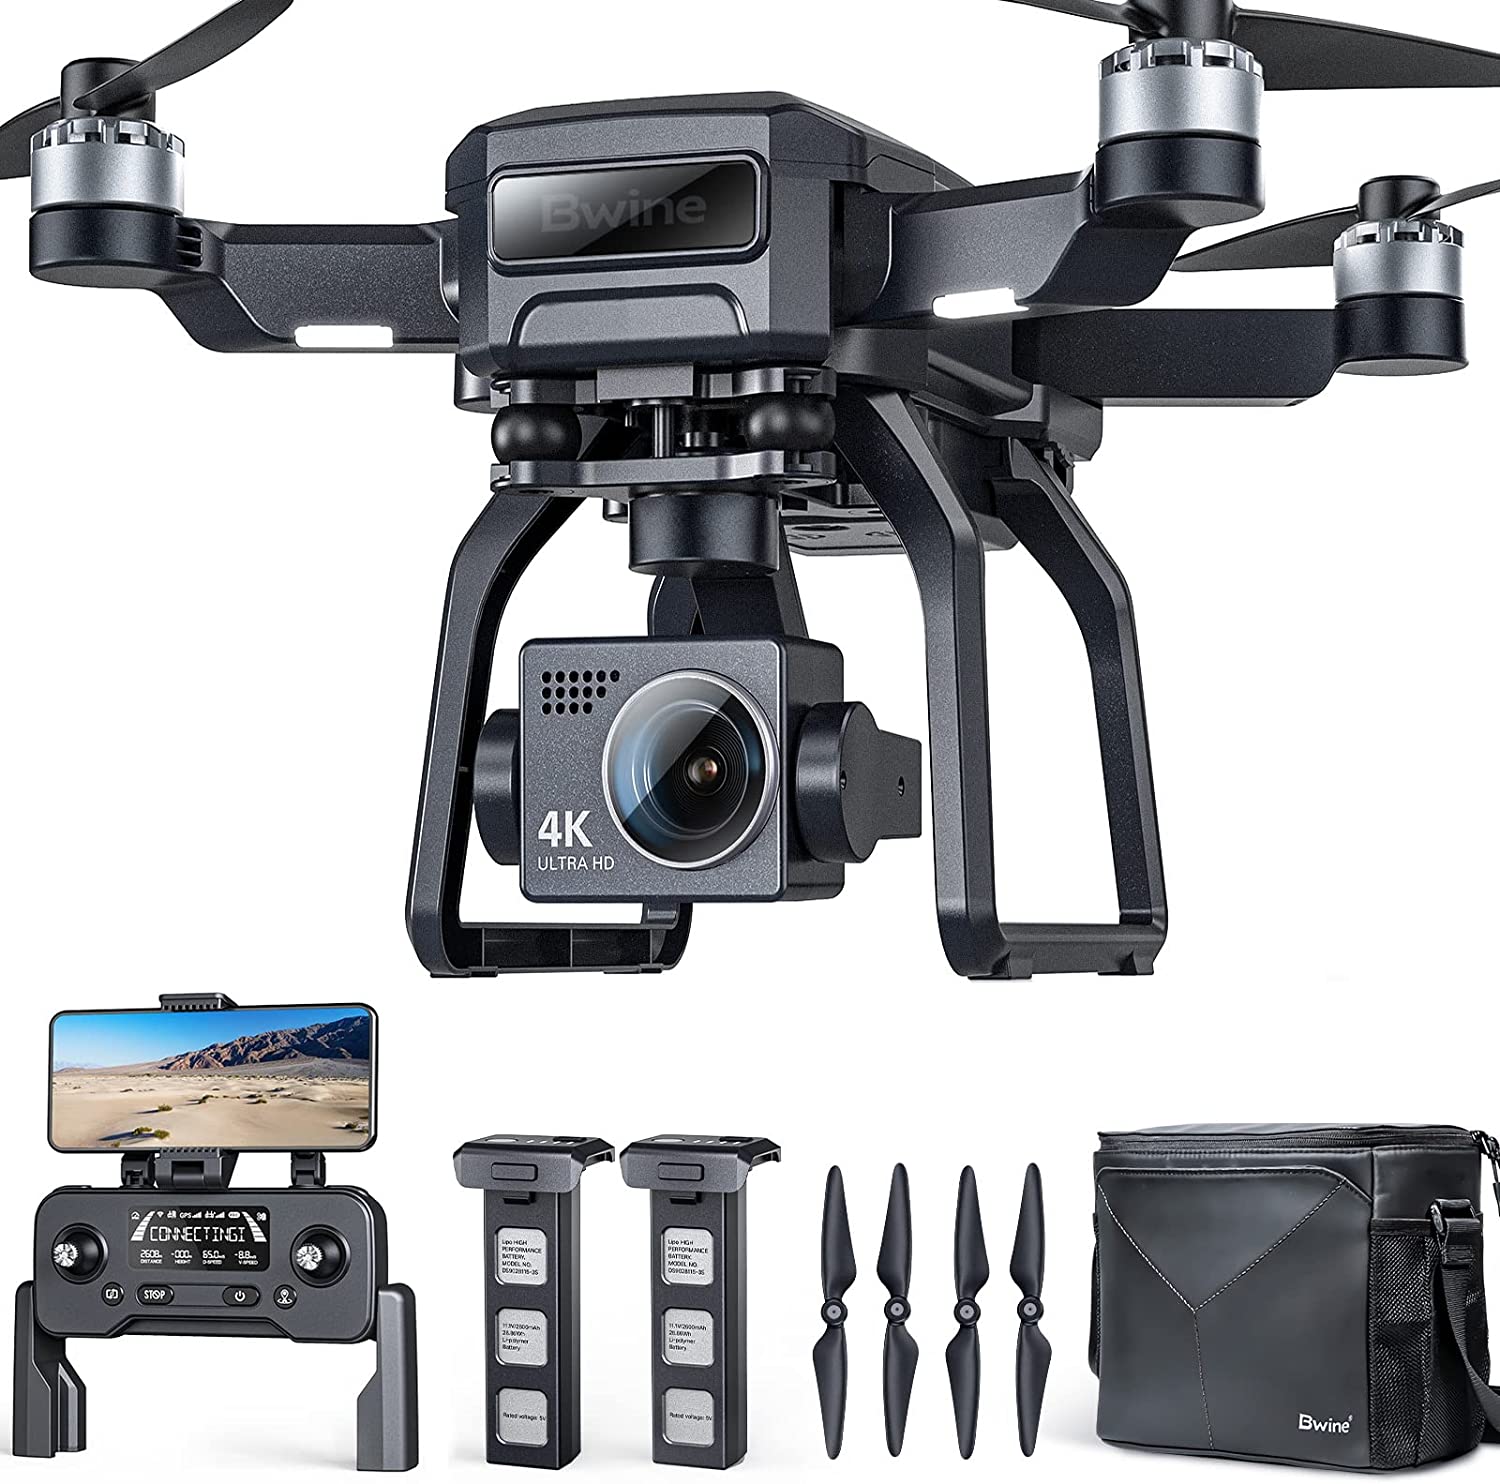 Bwine F7GB2 Drones with Camera for Adults 4K for Night Version, 9800FT Transmission Range, 3-Axis Gimbal, 2 Batteries 50 Min Flight Time, GPS Auto Return, Follow Me, Waypoints, Level 6 Wind Resistance